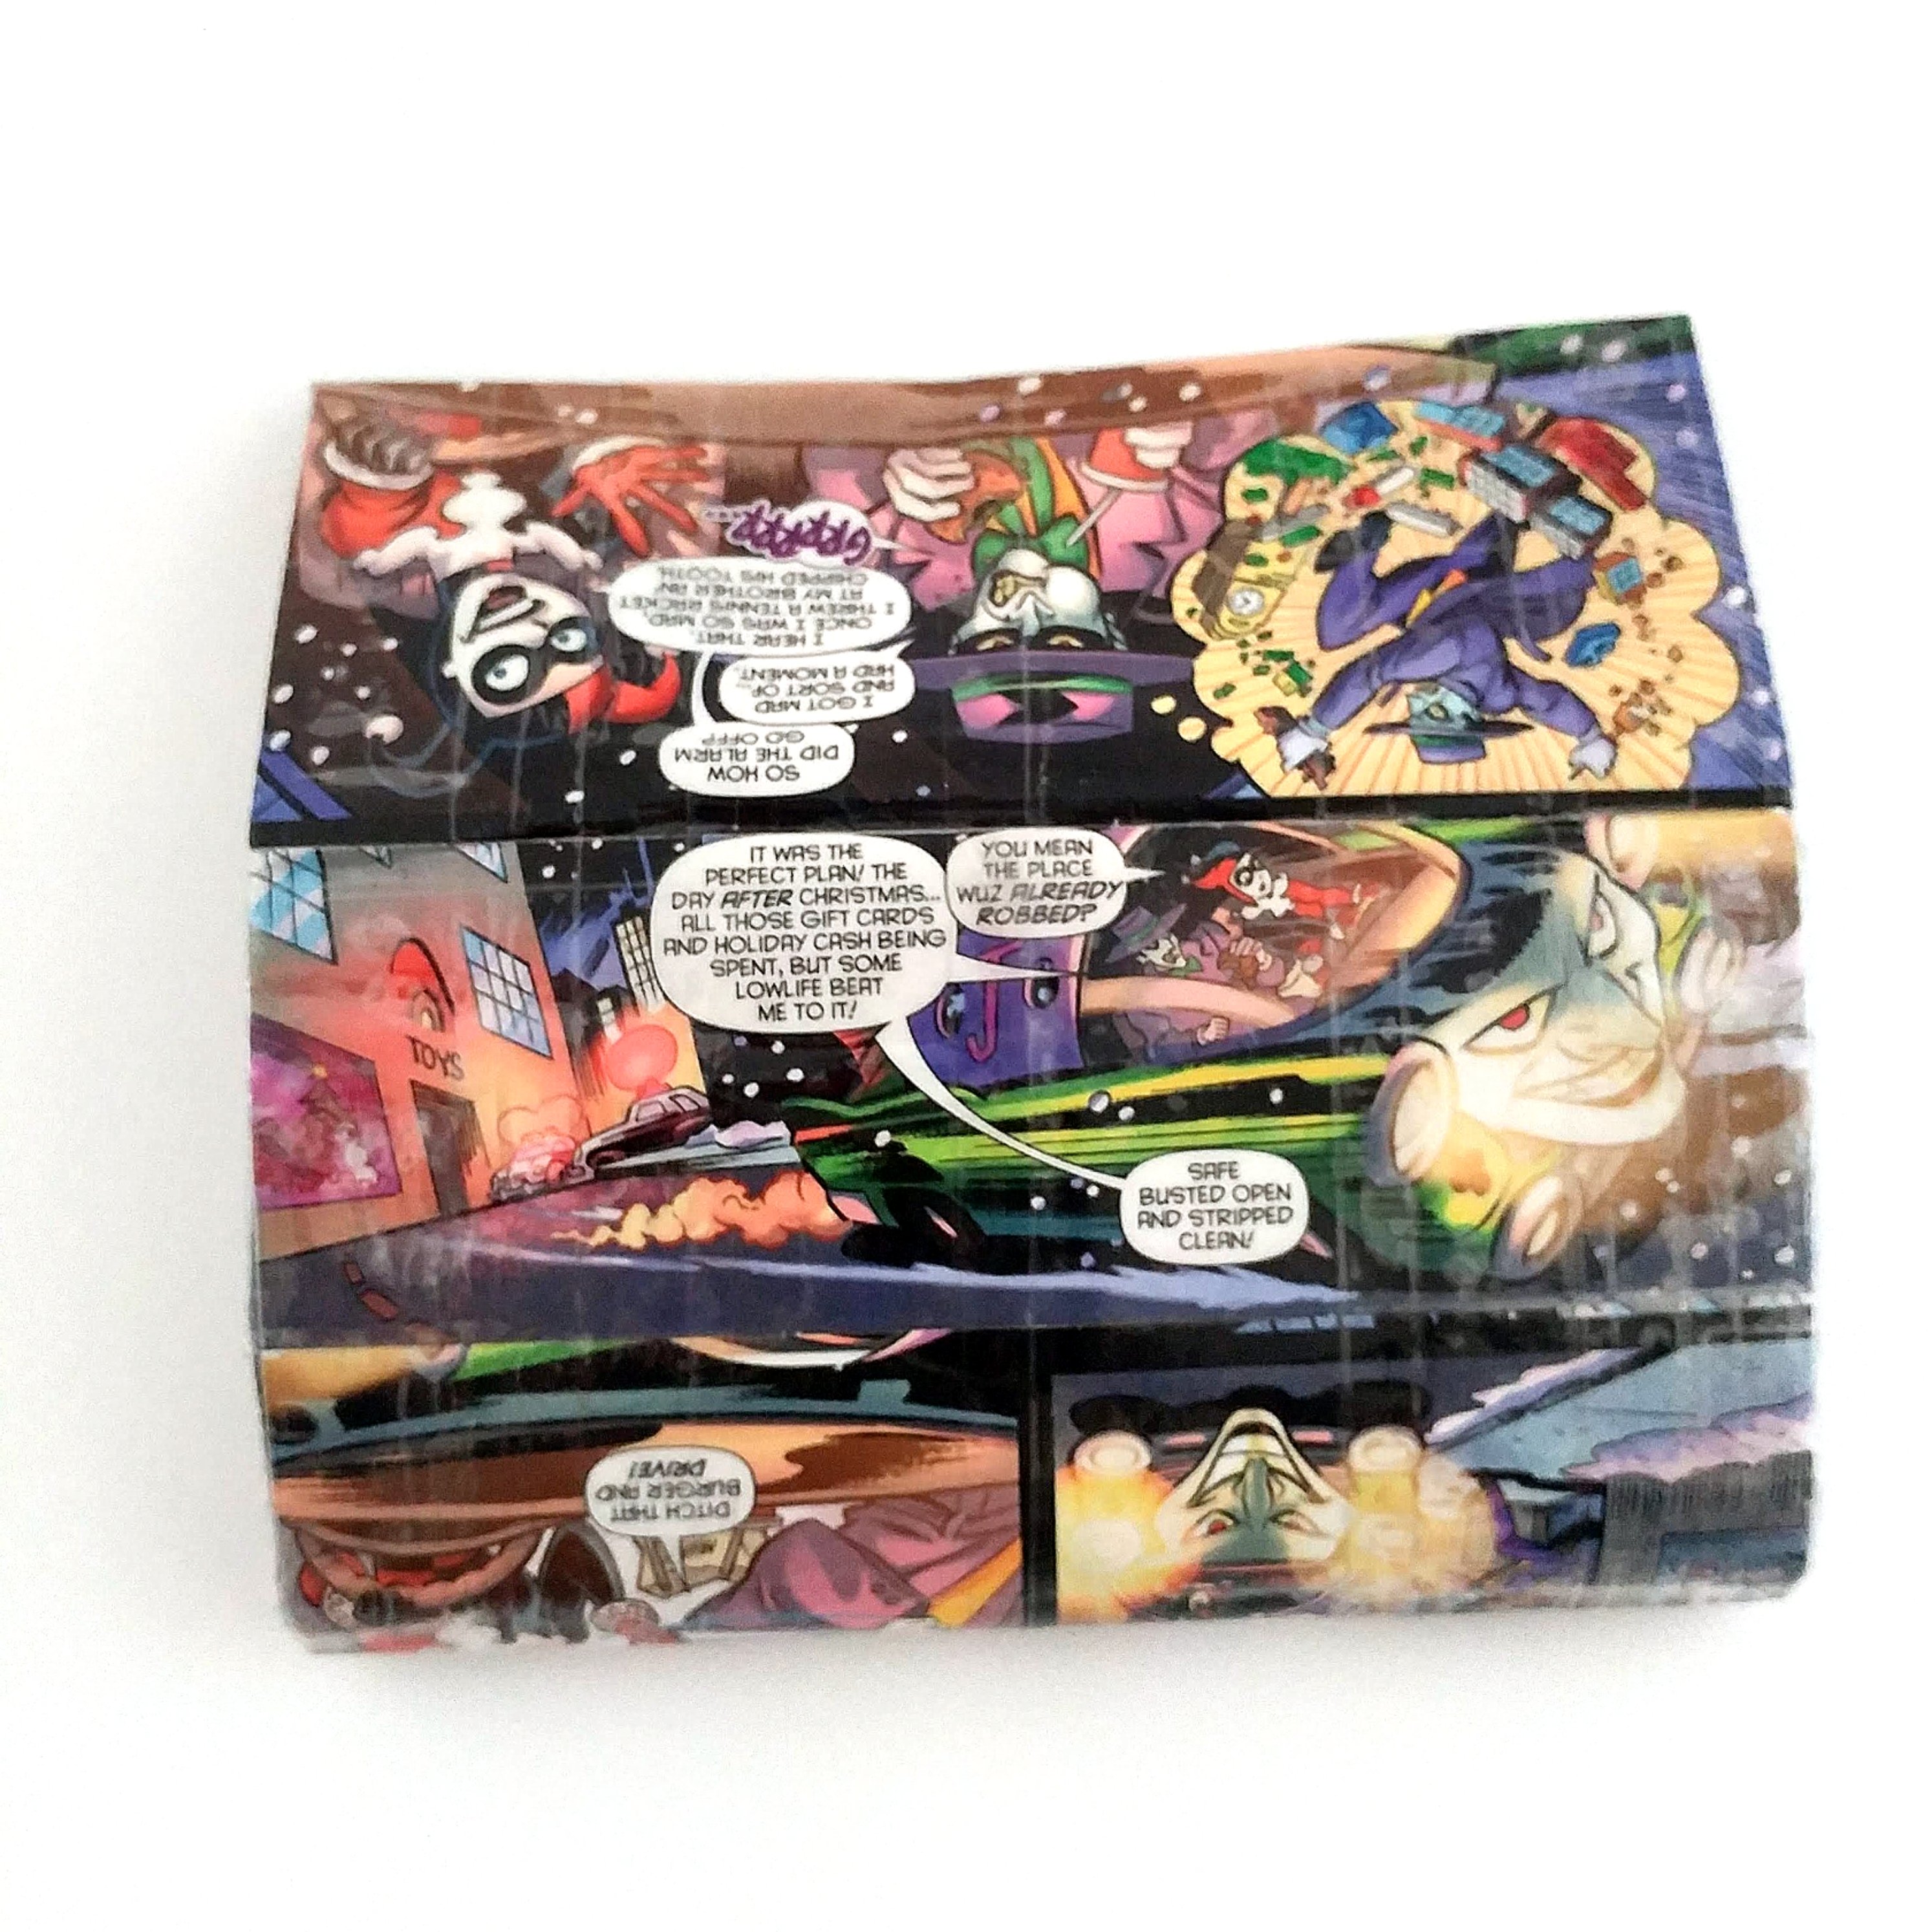 Front and back of Harley Quinn and the Joker long clutch style women's wallet made from a Harley Quinn comic book. 